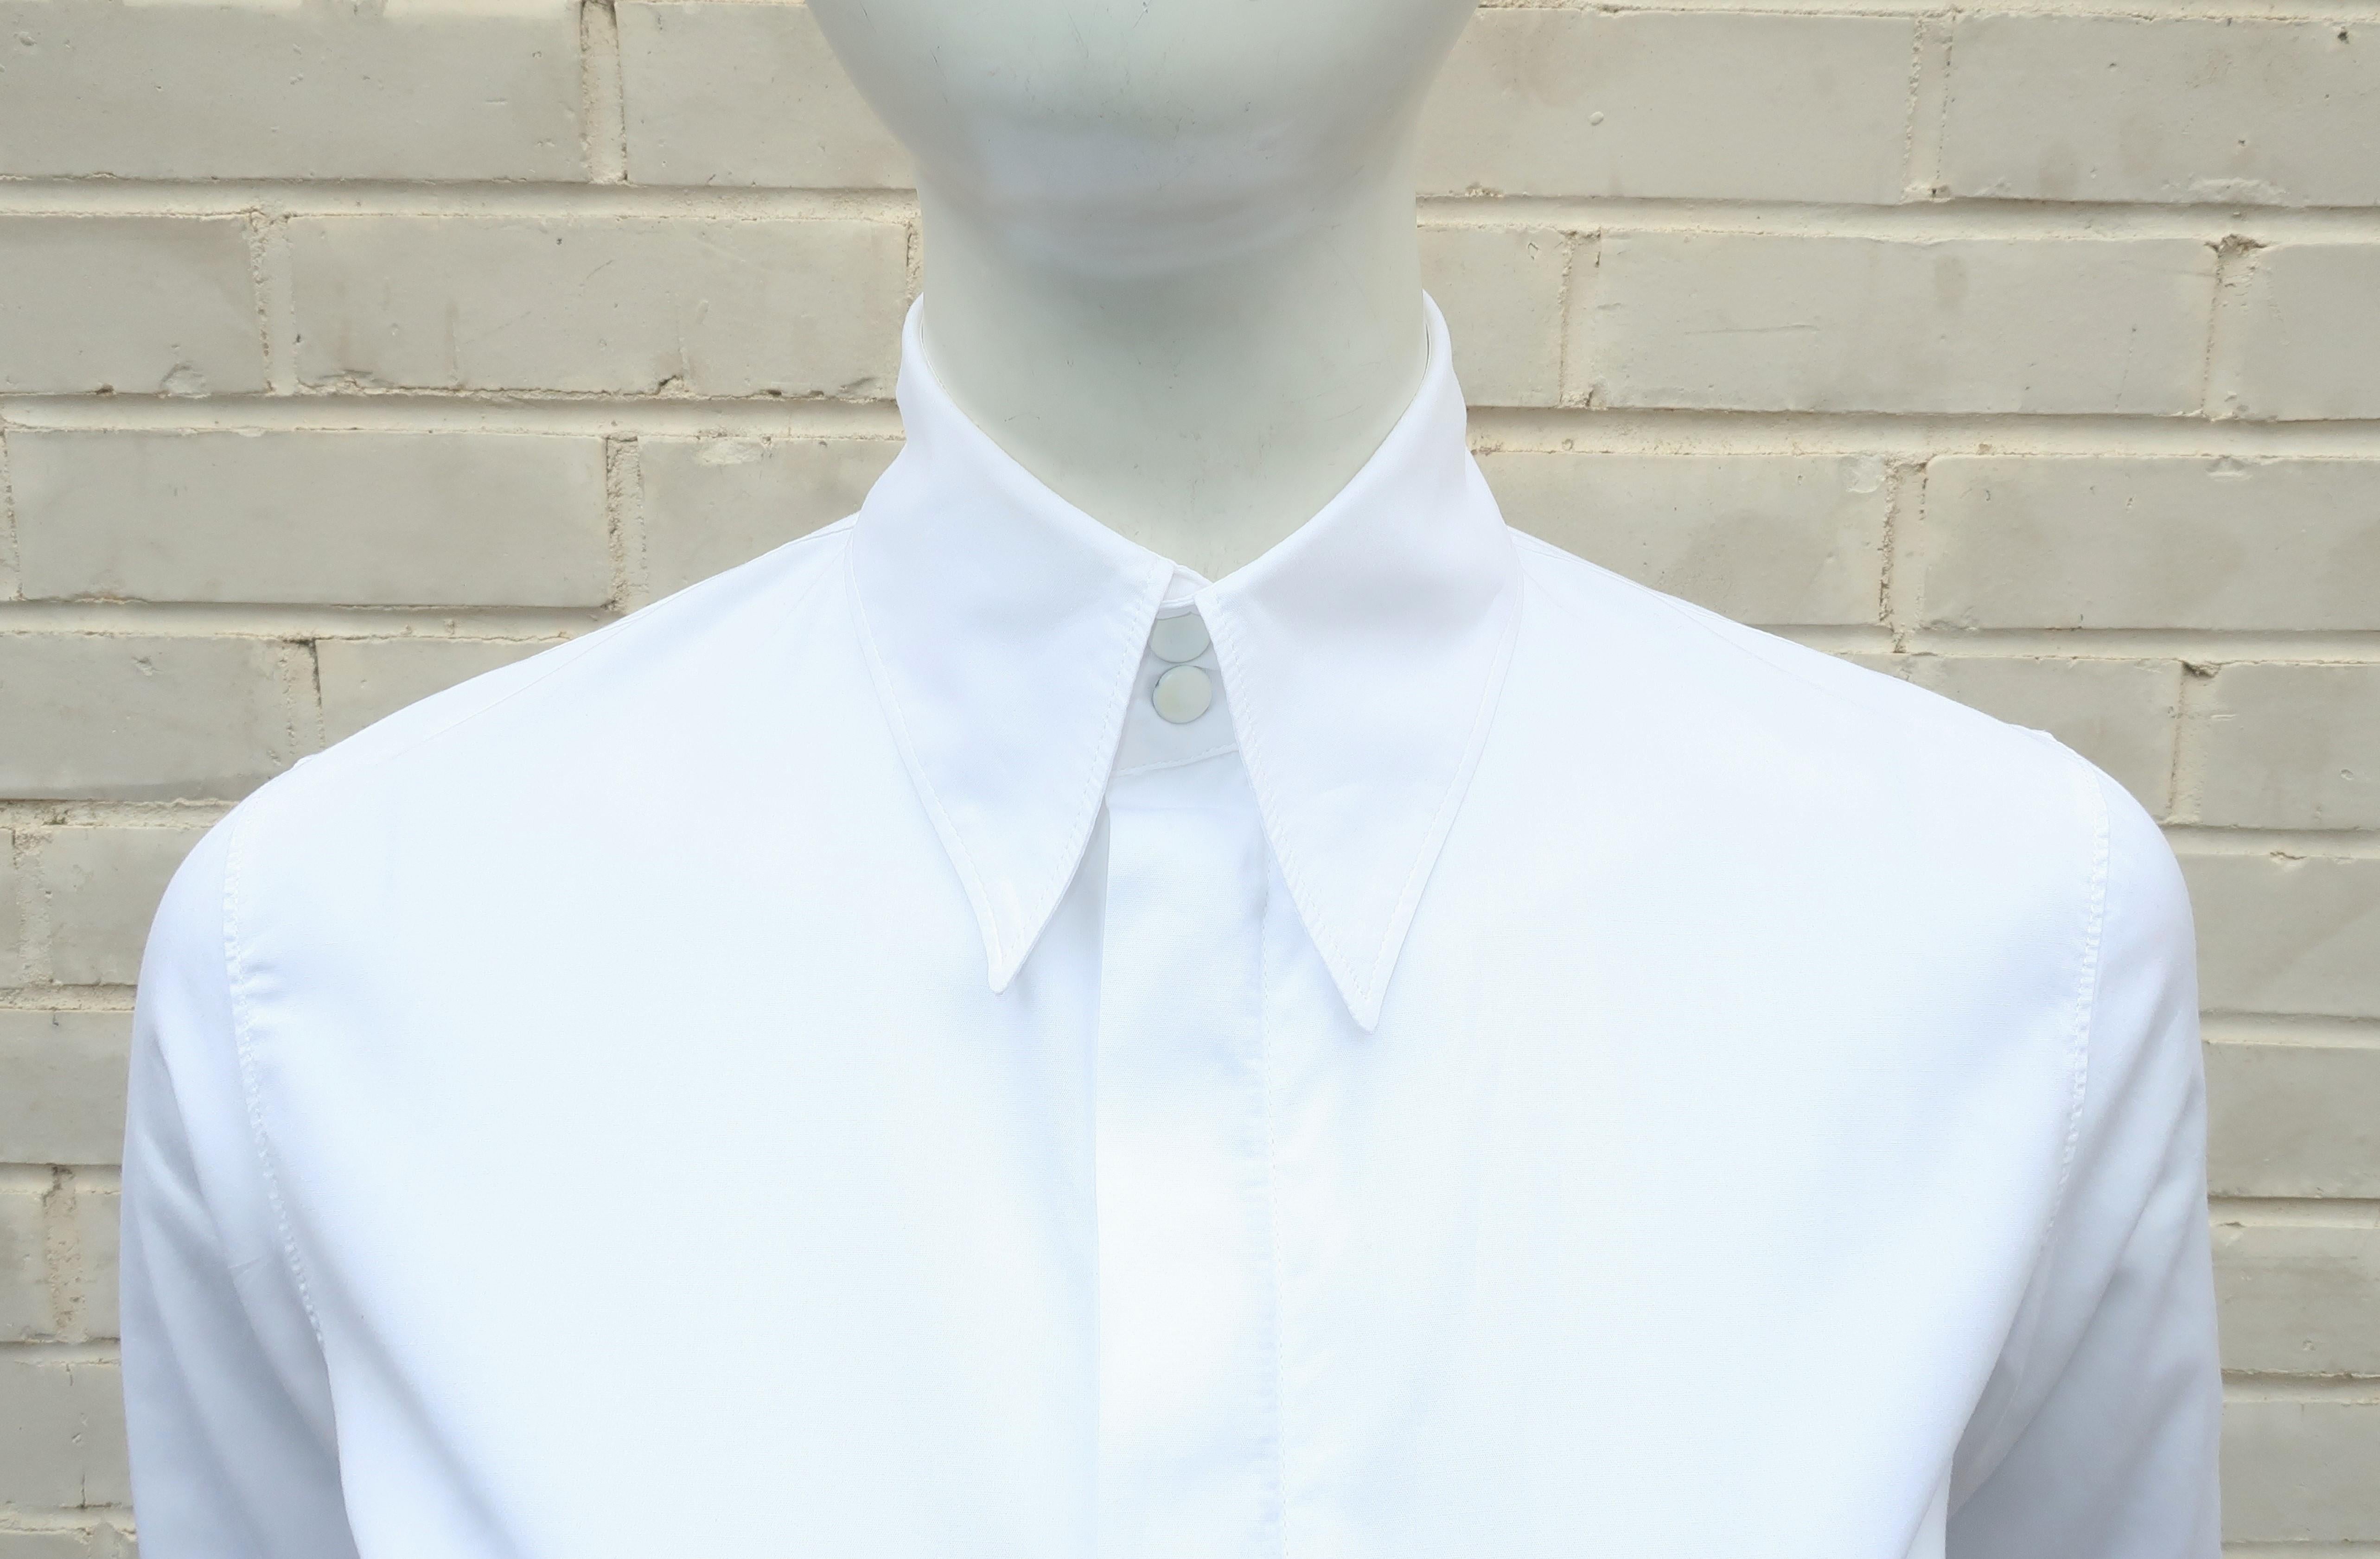 Jean Paul Gaultier White Shirt With Black Leather Restraint Cuffs  3